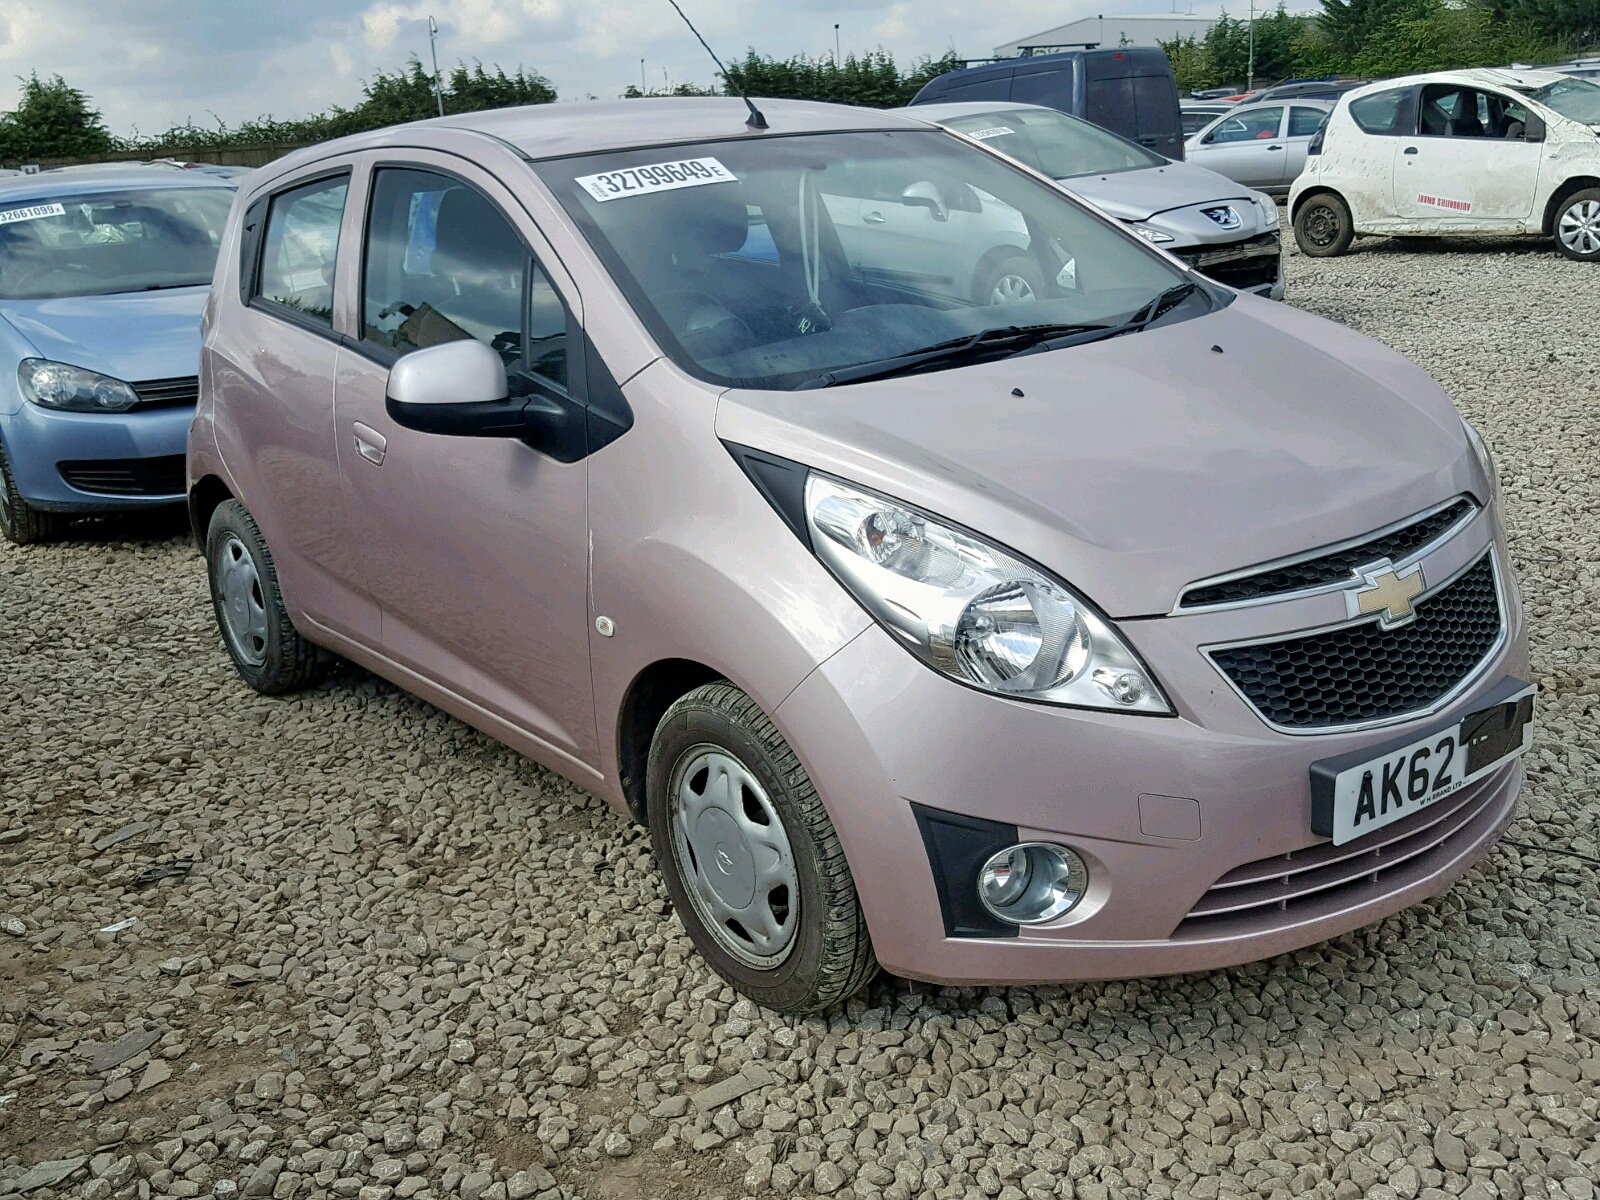 2012 CHEVROLET SPARK LS for sale at Copart UK - Salvage Car Auctions